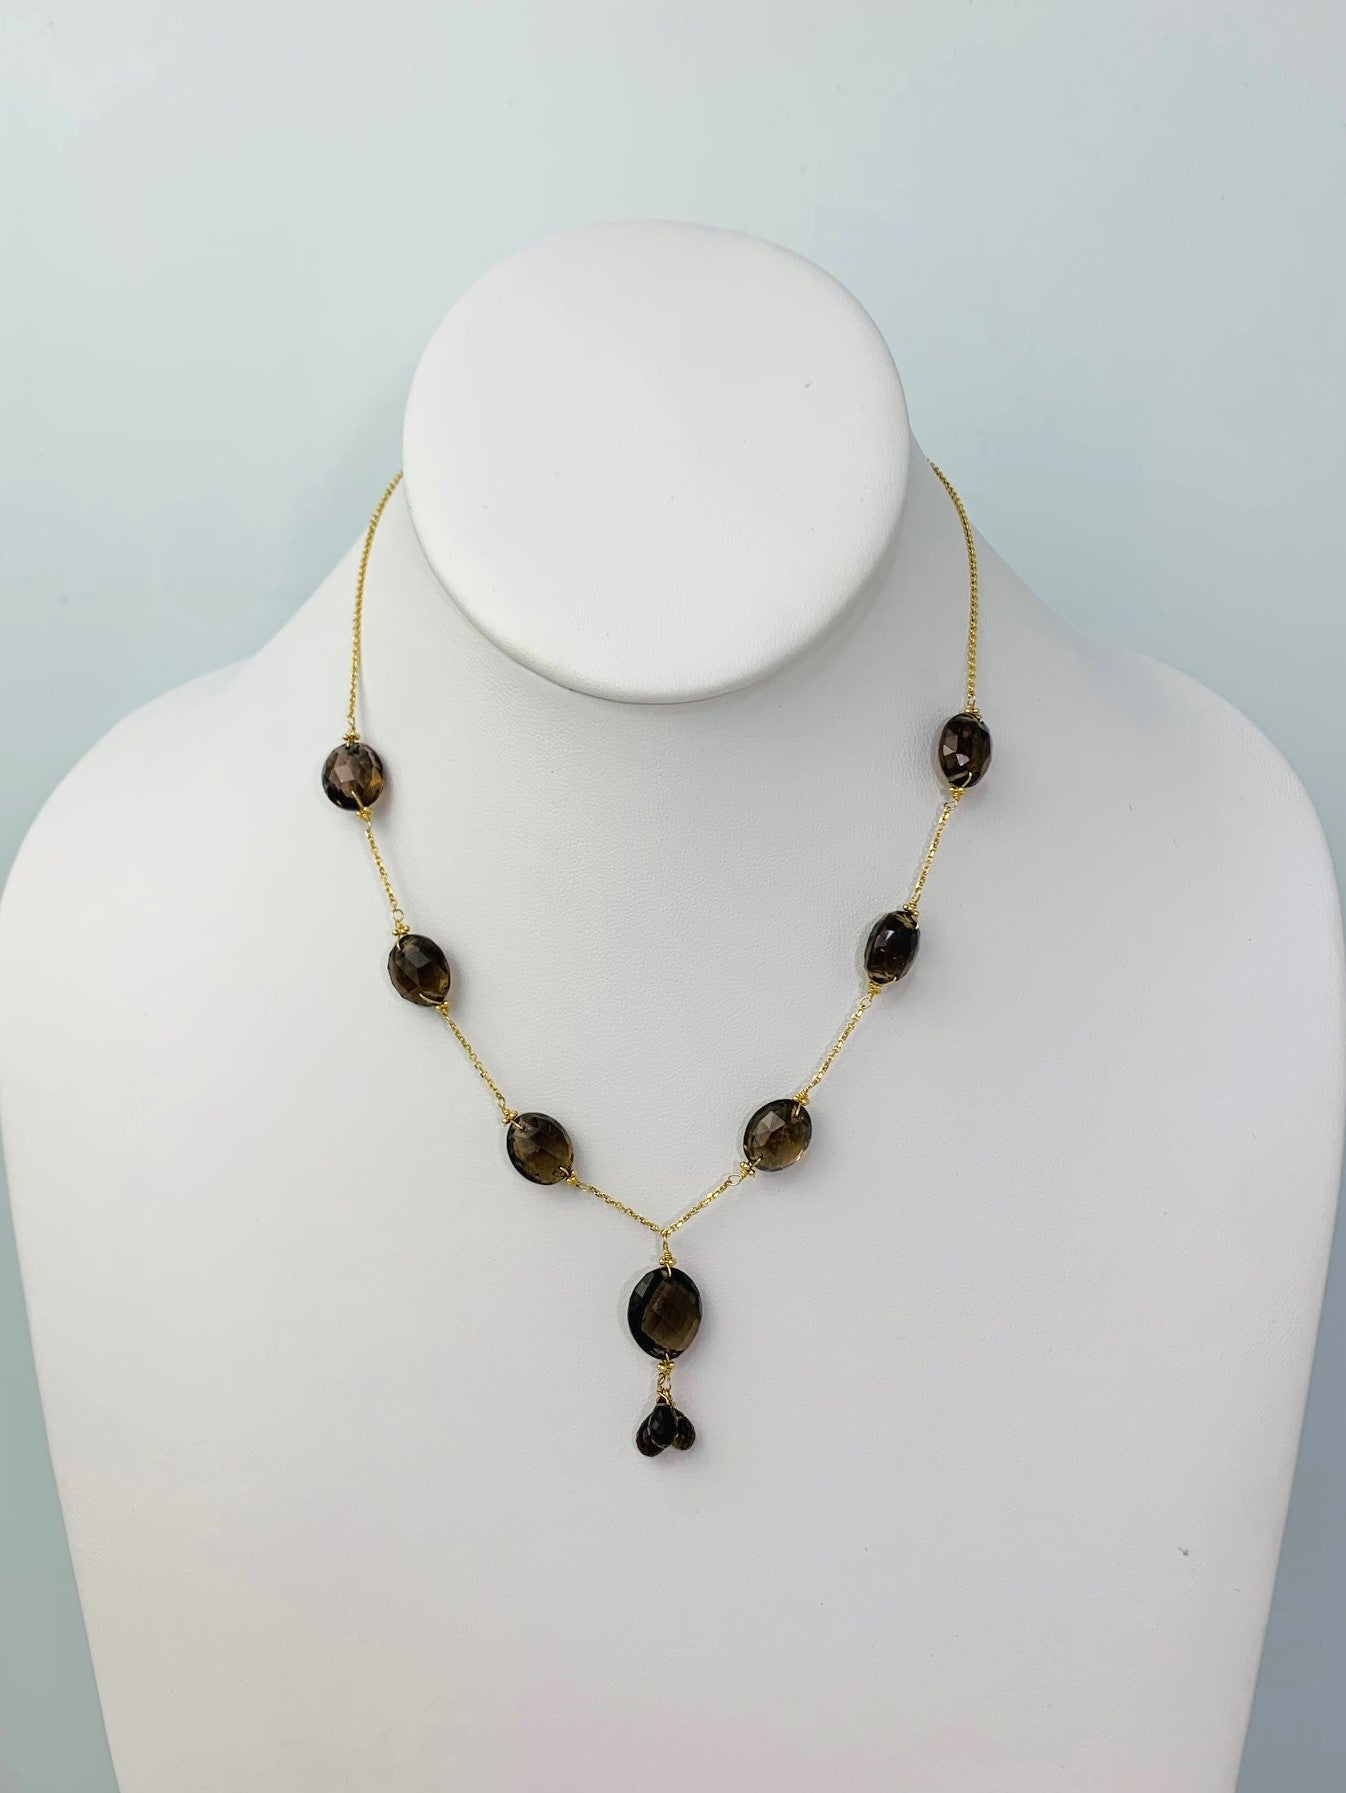 15-16" Smokey Quartz Station Necklace With Oval Checkerboard And 3 Briolette Tassel Drop in 14KY - NCK-369-TASTNCGM14Y-SQ-16